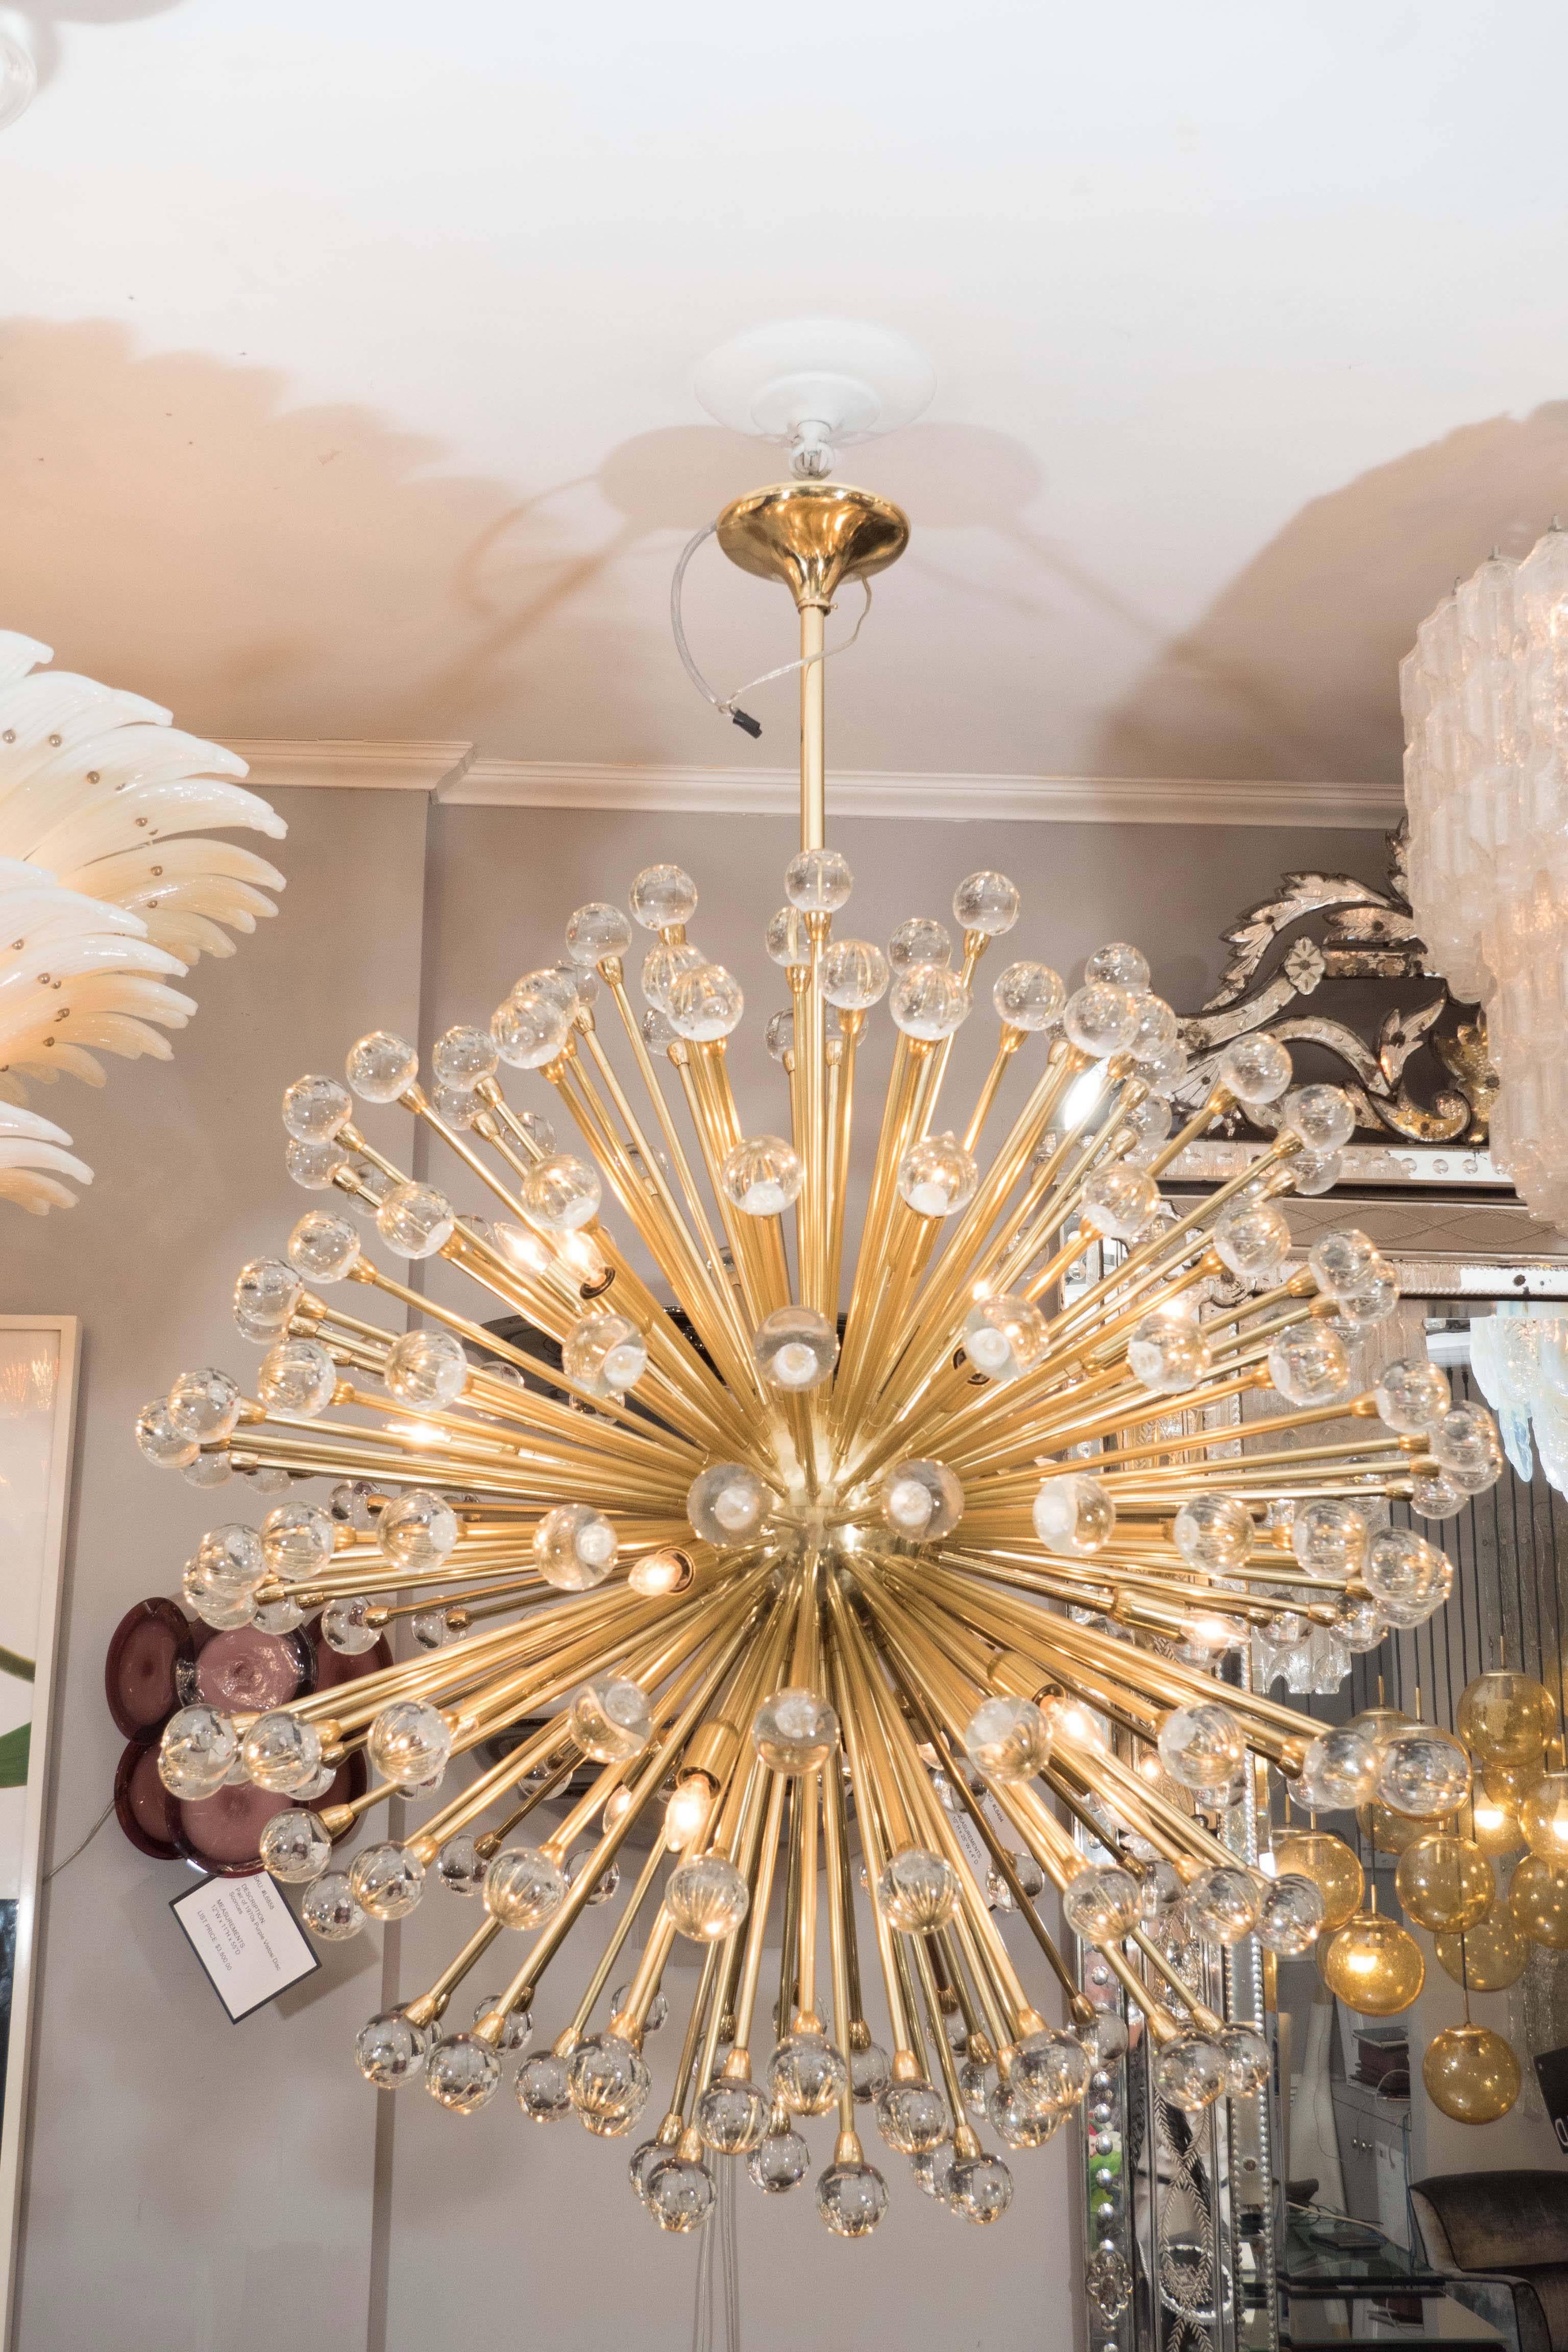 Stunning huge Murano glass ball sputnik chandelier in polished brass finish. This listing is for a floor model chandelier that is in excellent condition. 